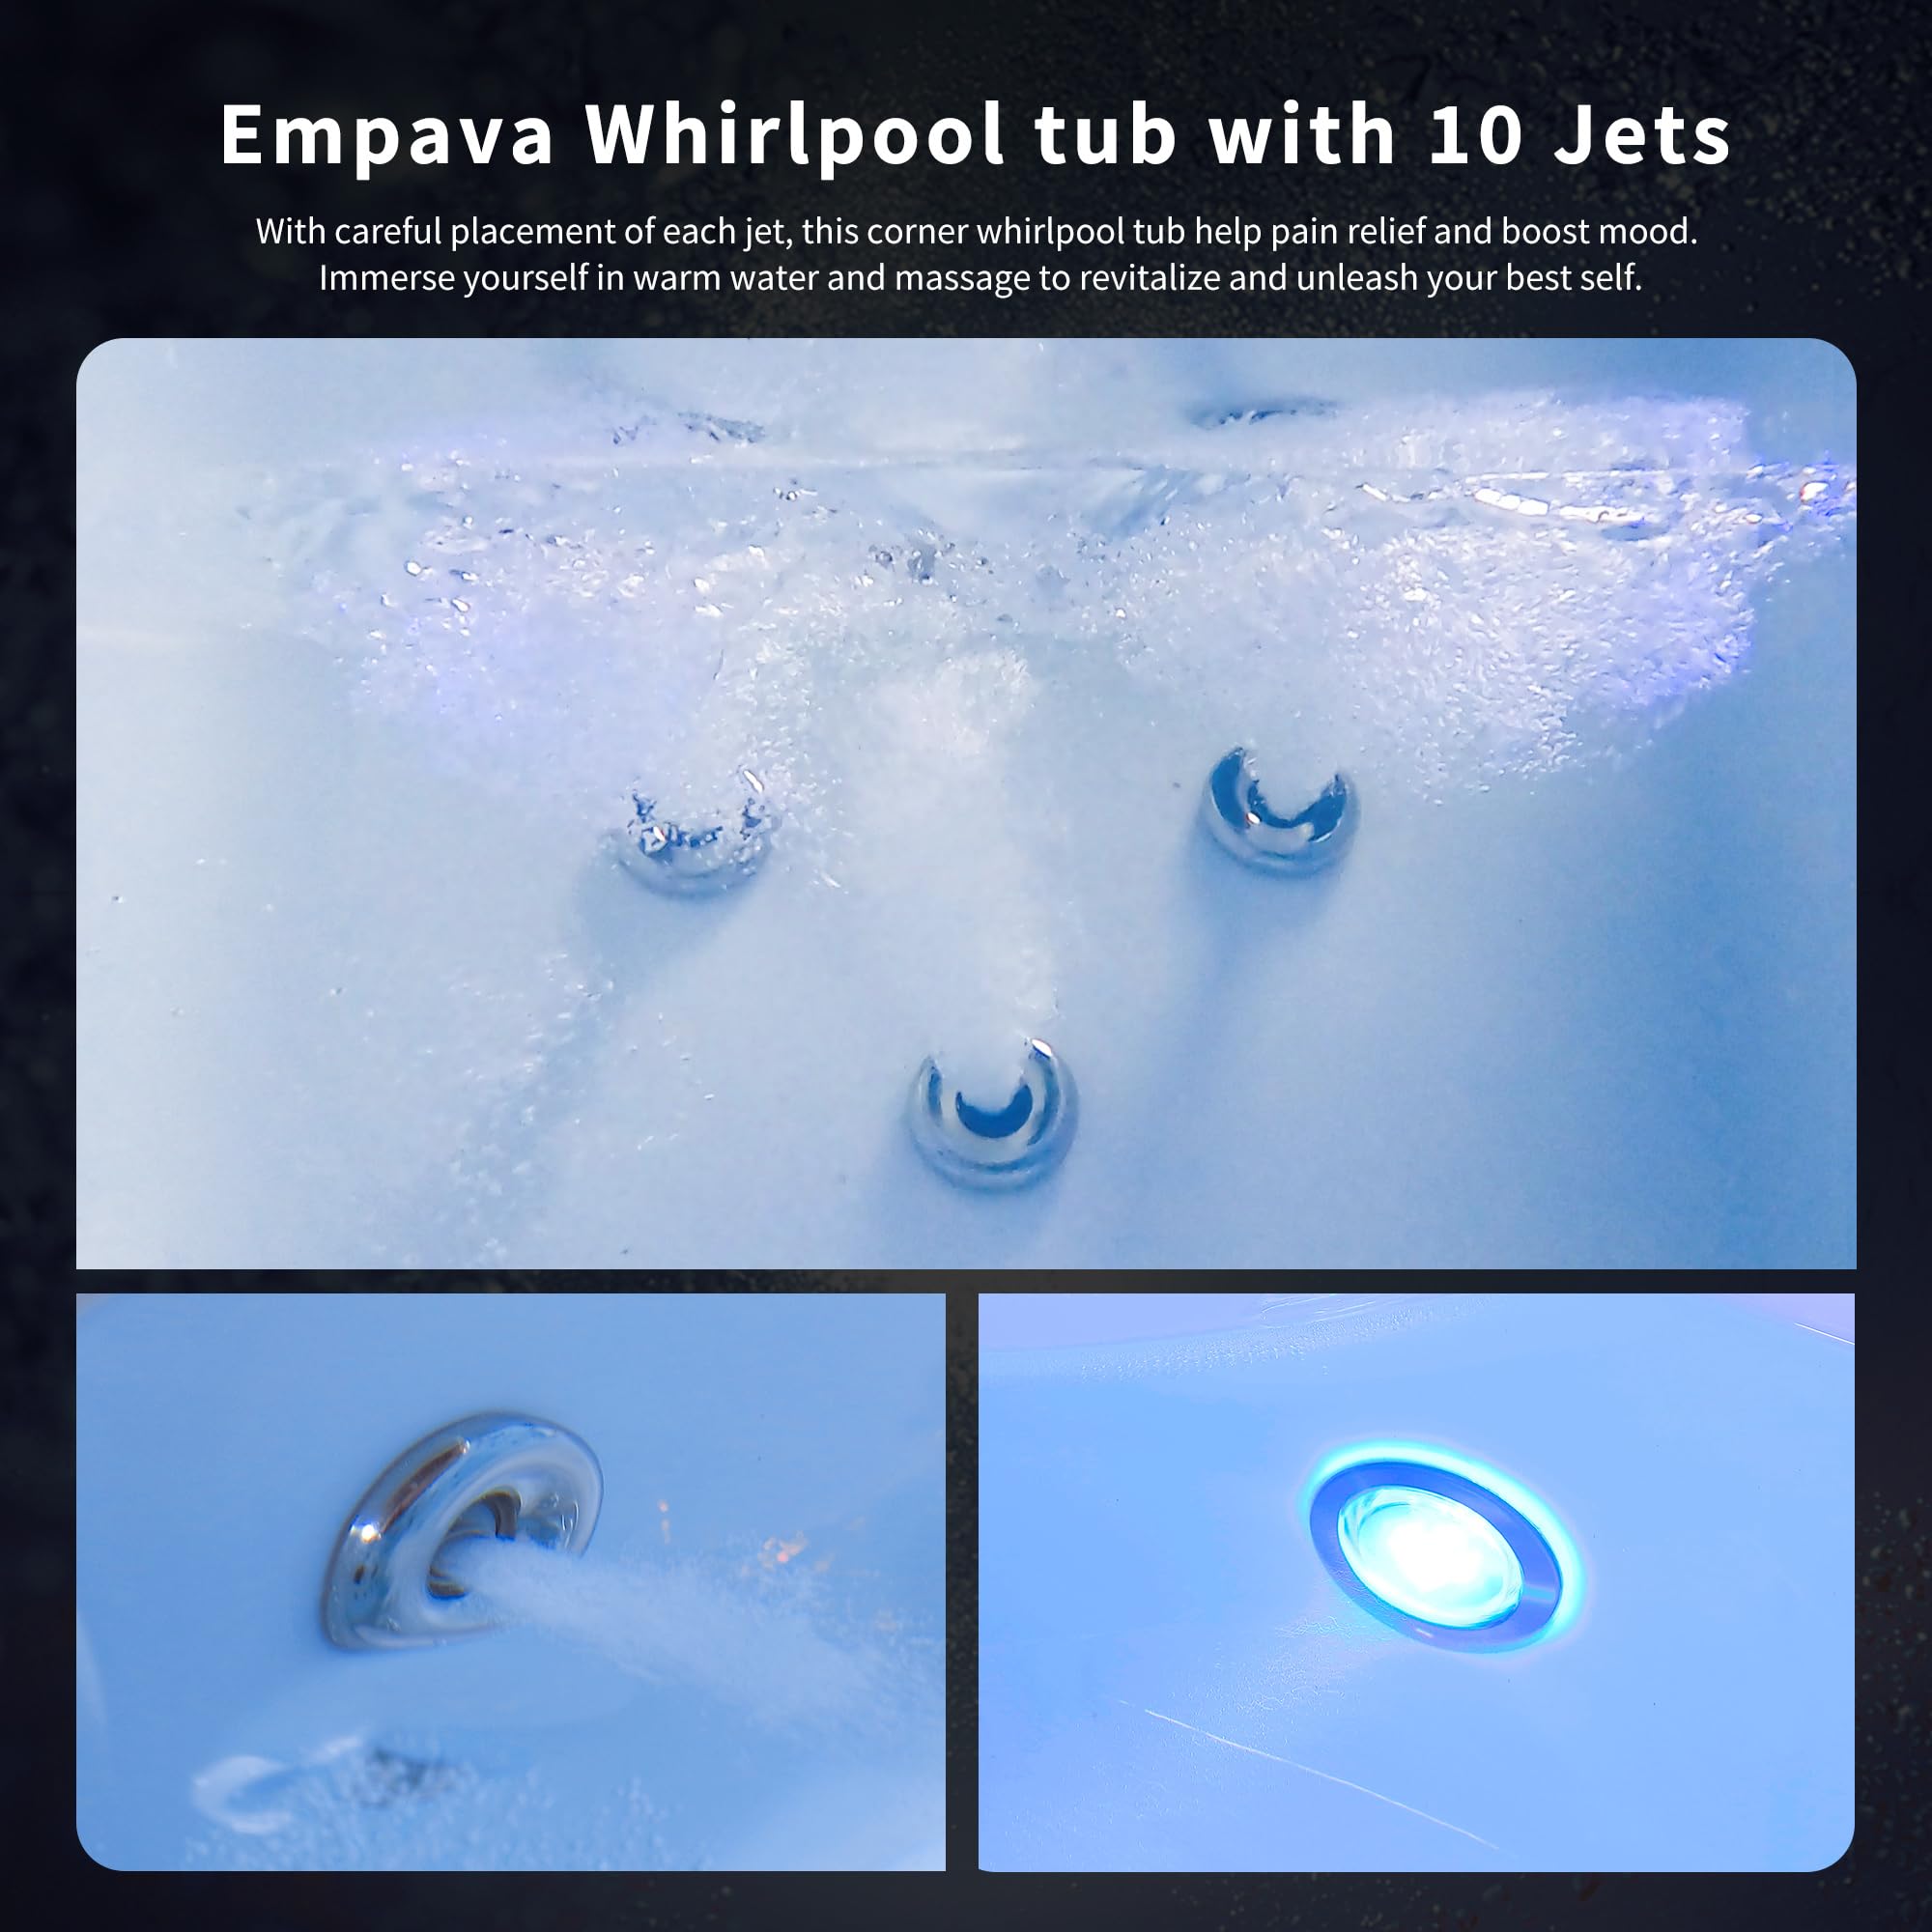 Empava Corner Whirlpool Bathtub with Heater,2 Person Jetted Tub with Light,Spa Hydromassage with Chromatherapy,Acrylic,59 in